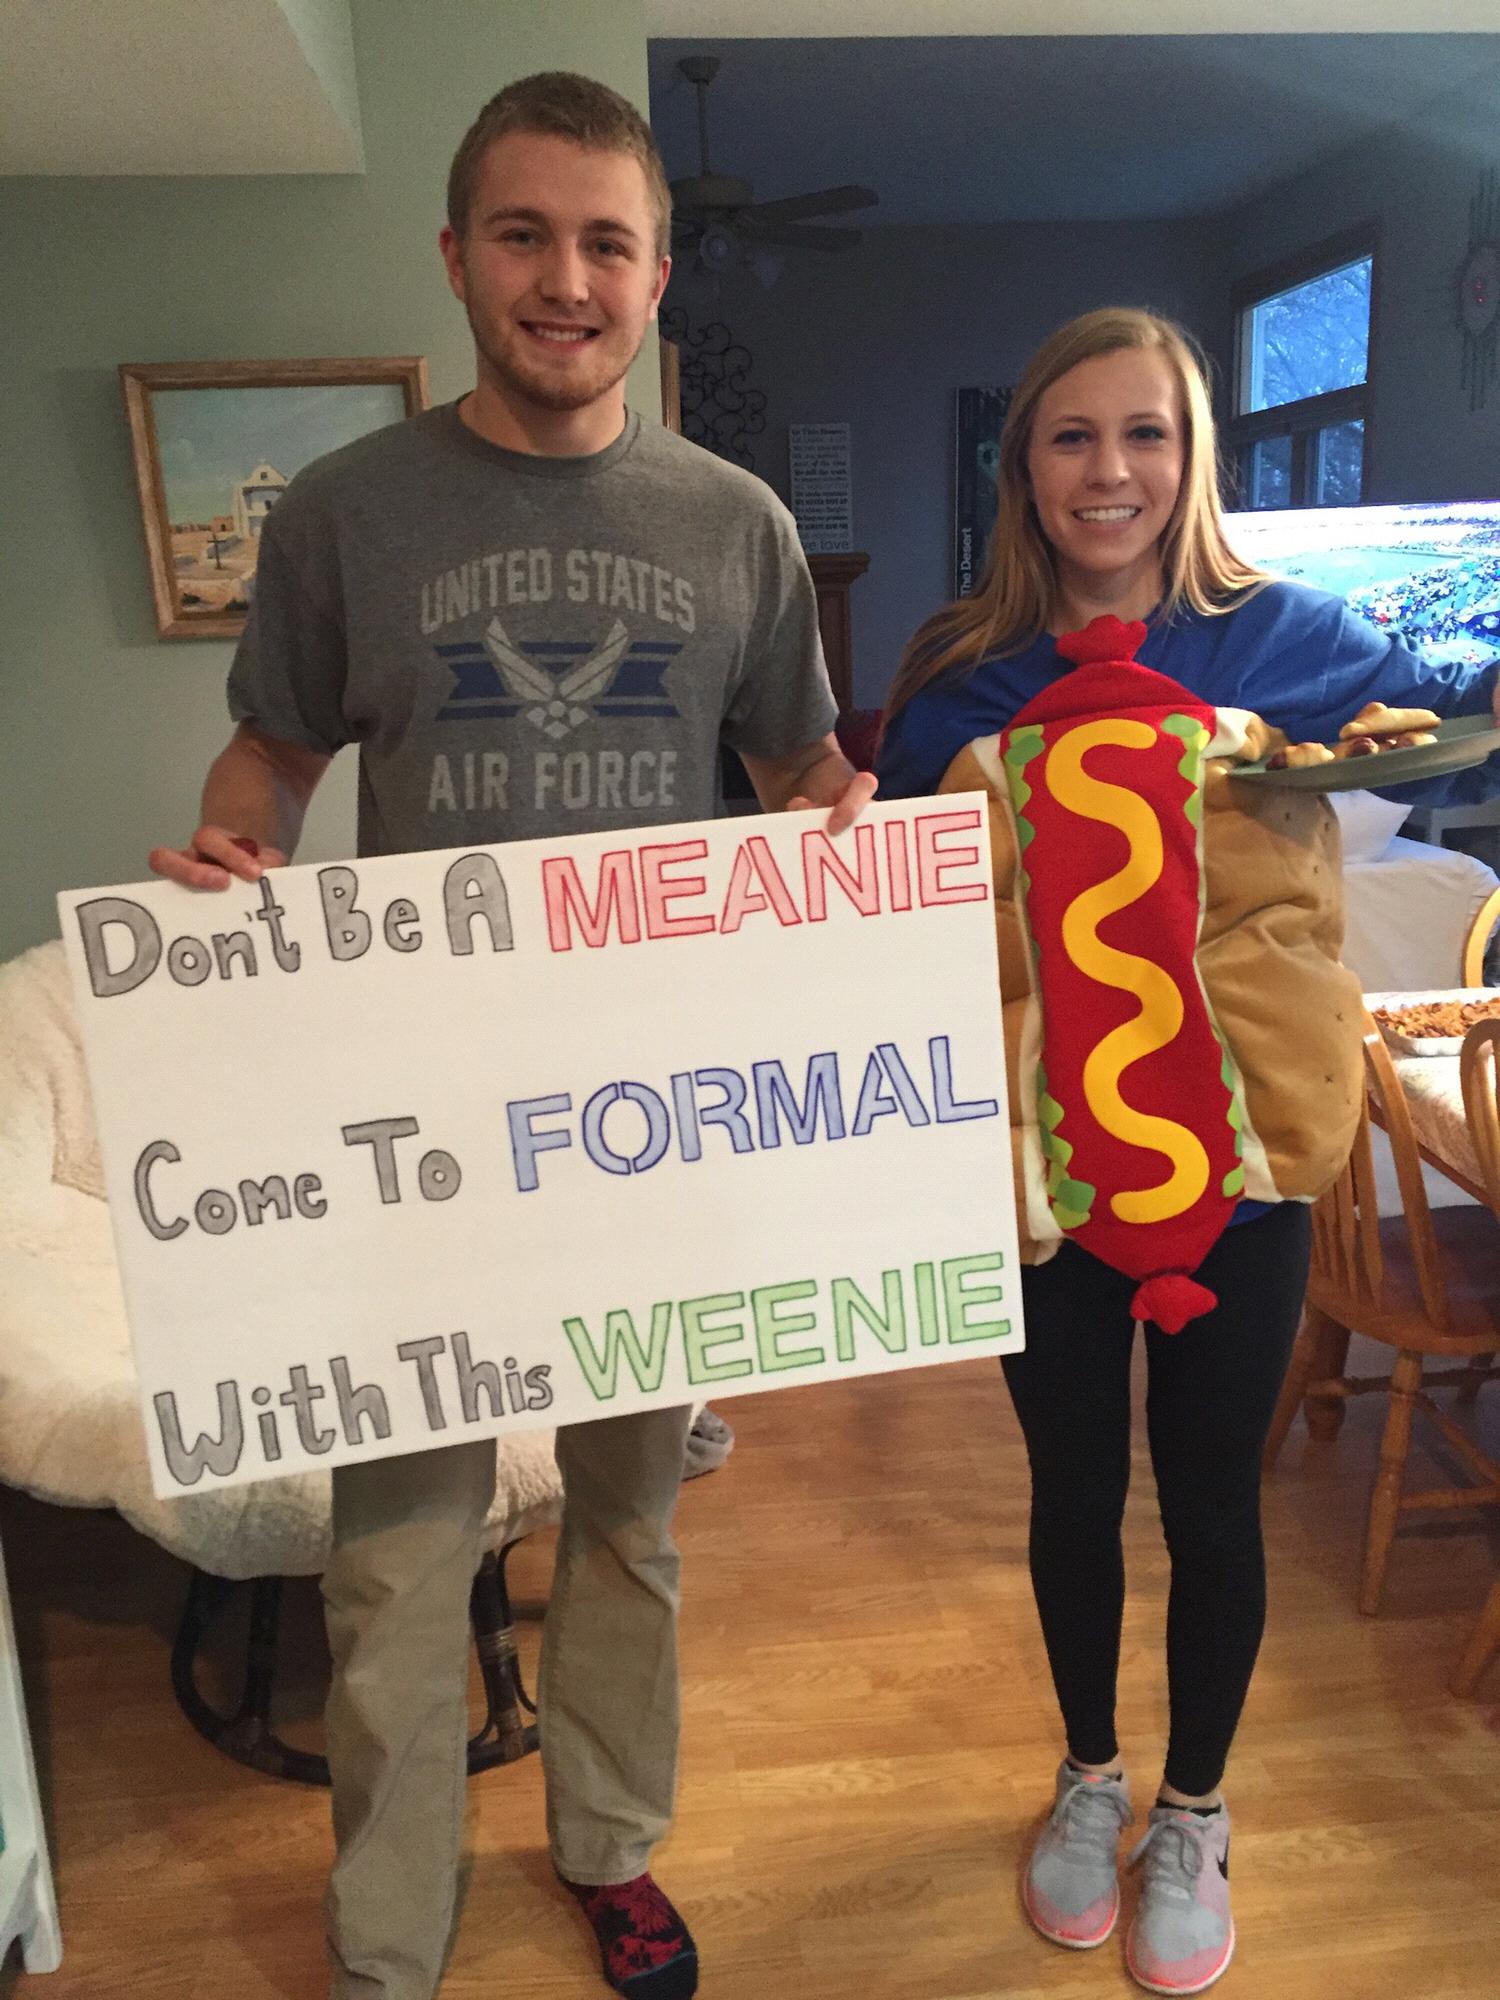 How I asked Price to formal!